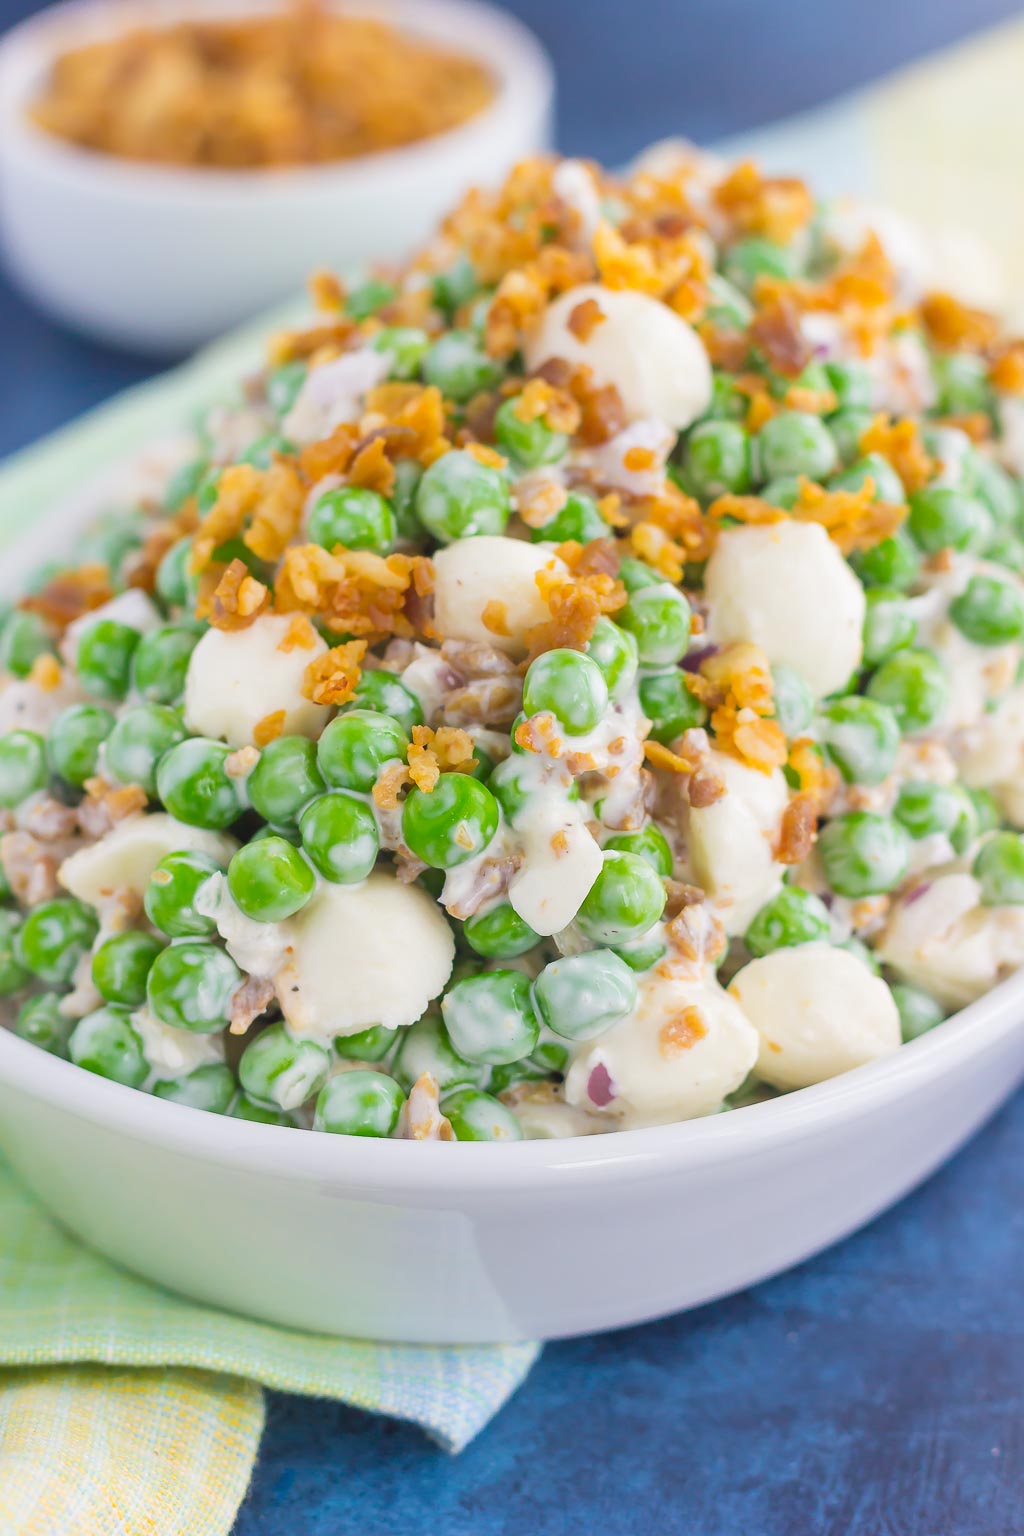 Filled with crunchy peas, feta cheese, red onion, and crumbled bacon, this Creamy Pea Salad will take your salad experience to a whole new level!